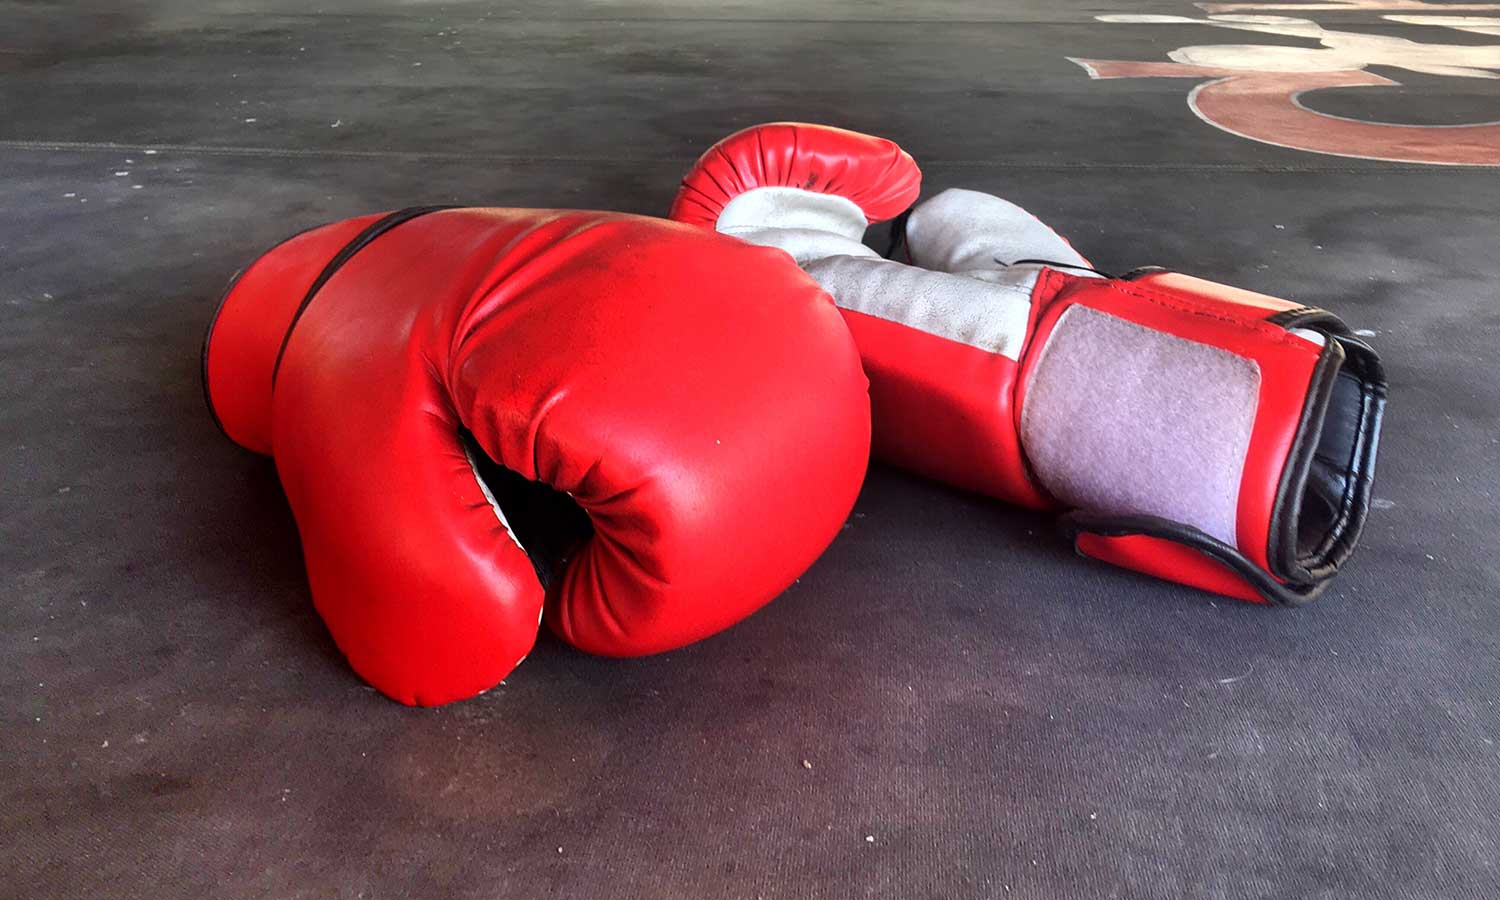 boxing gloves that you might wear if you're arguing with a bipolar person